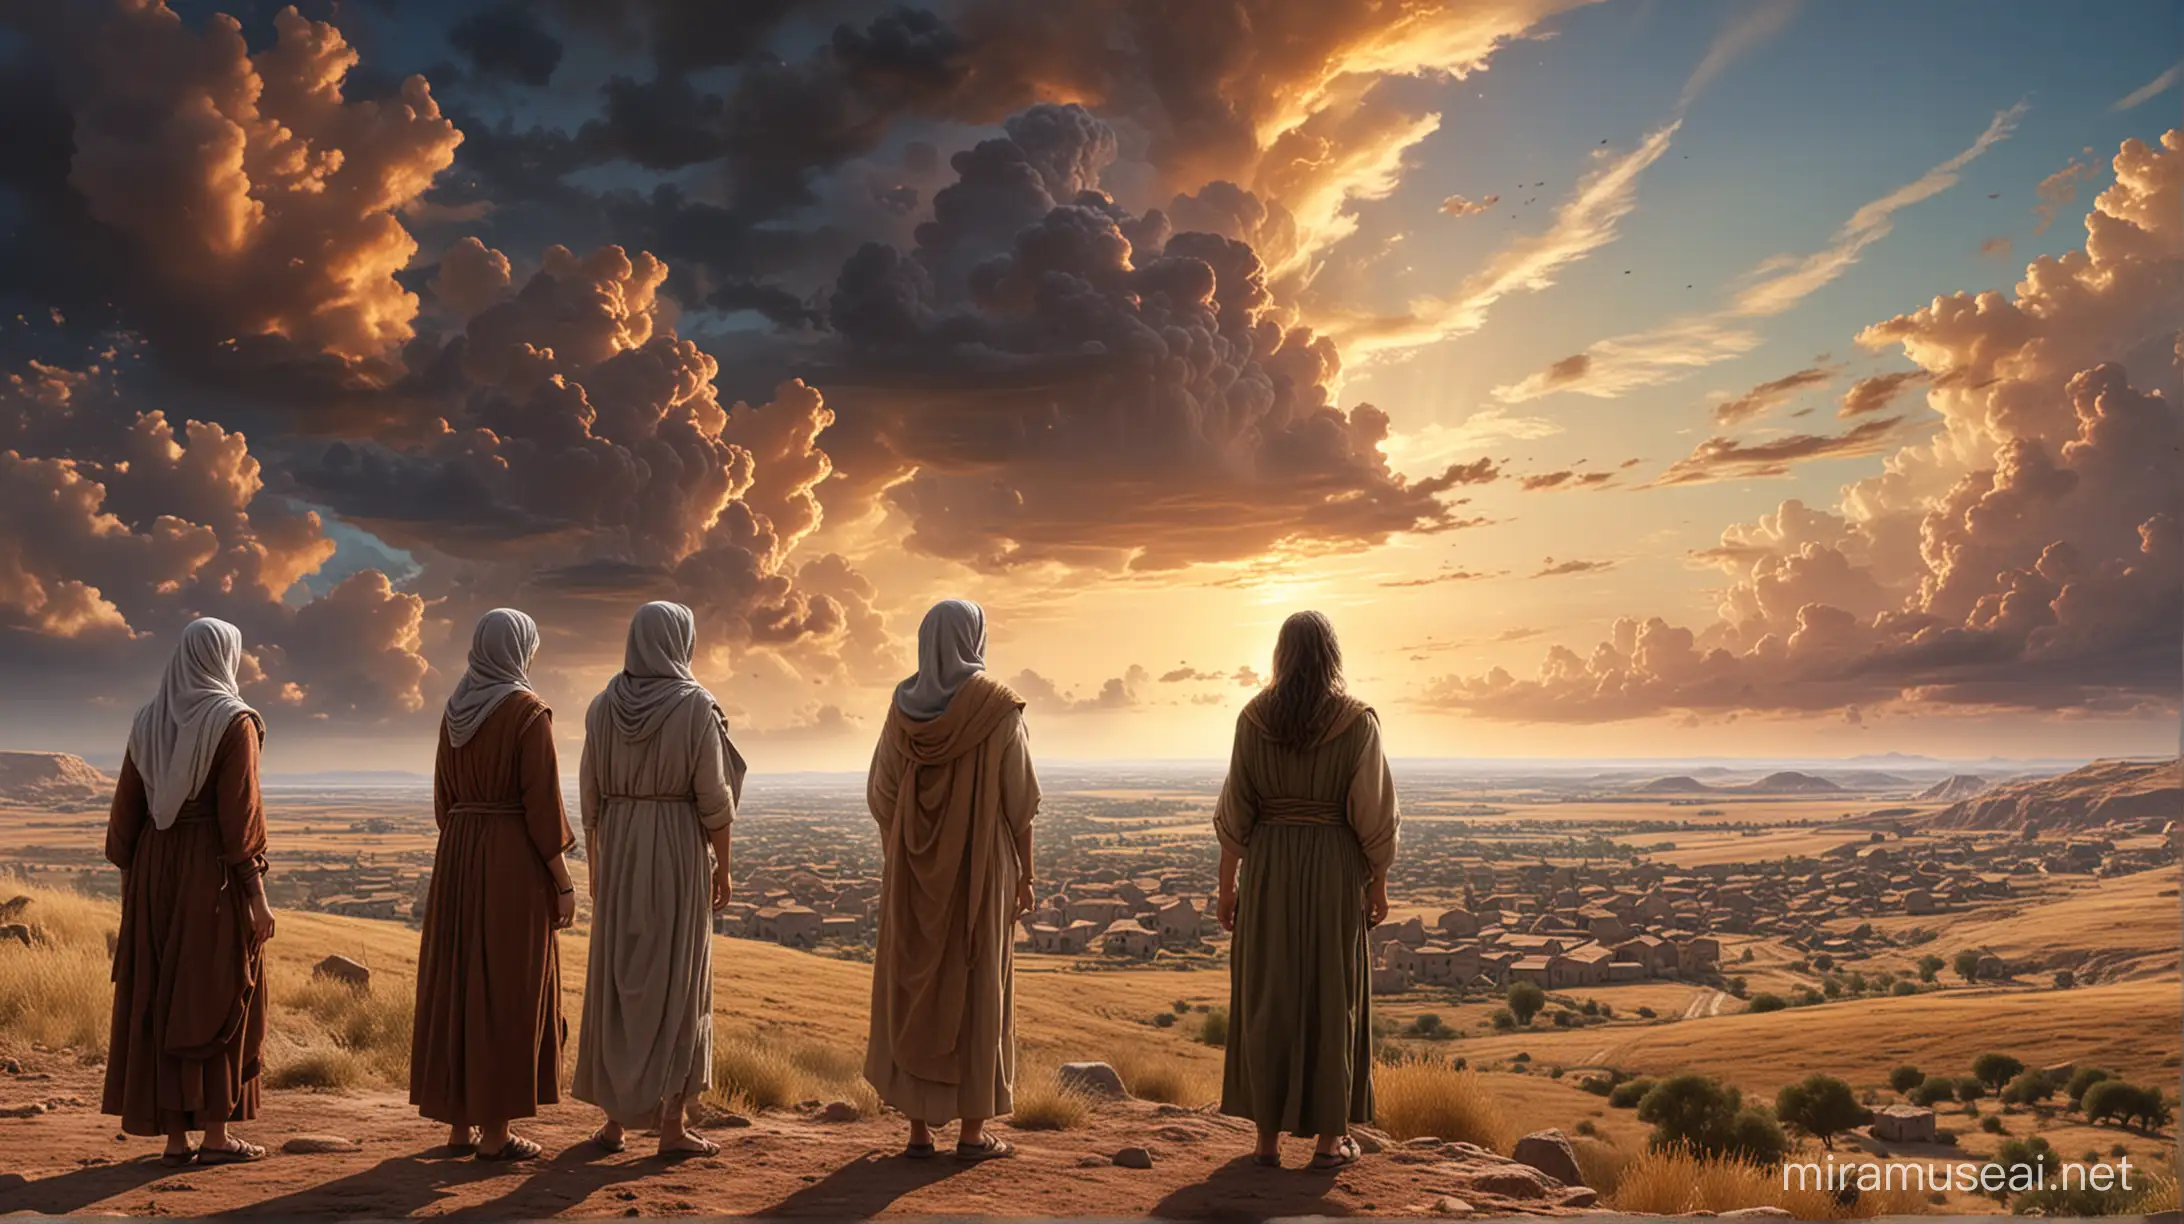 A man and 3 women standing, looking down at a big village in the distance, and a magnificent sky, in the era of Moses.